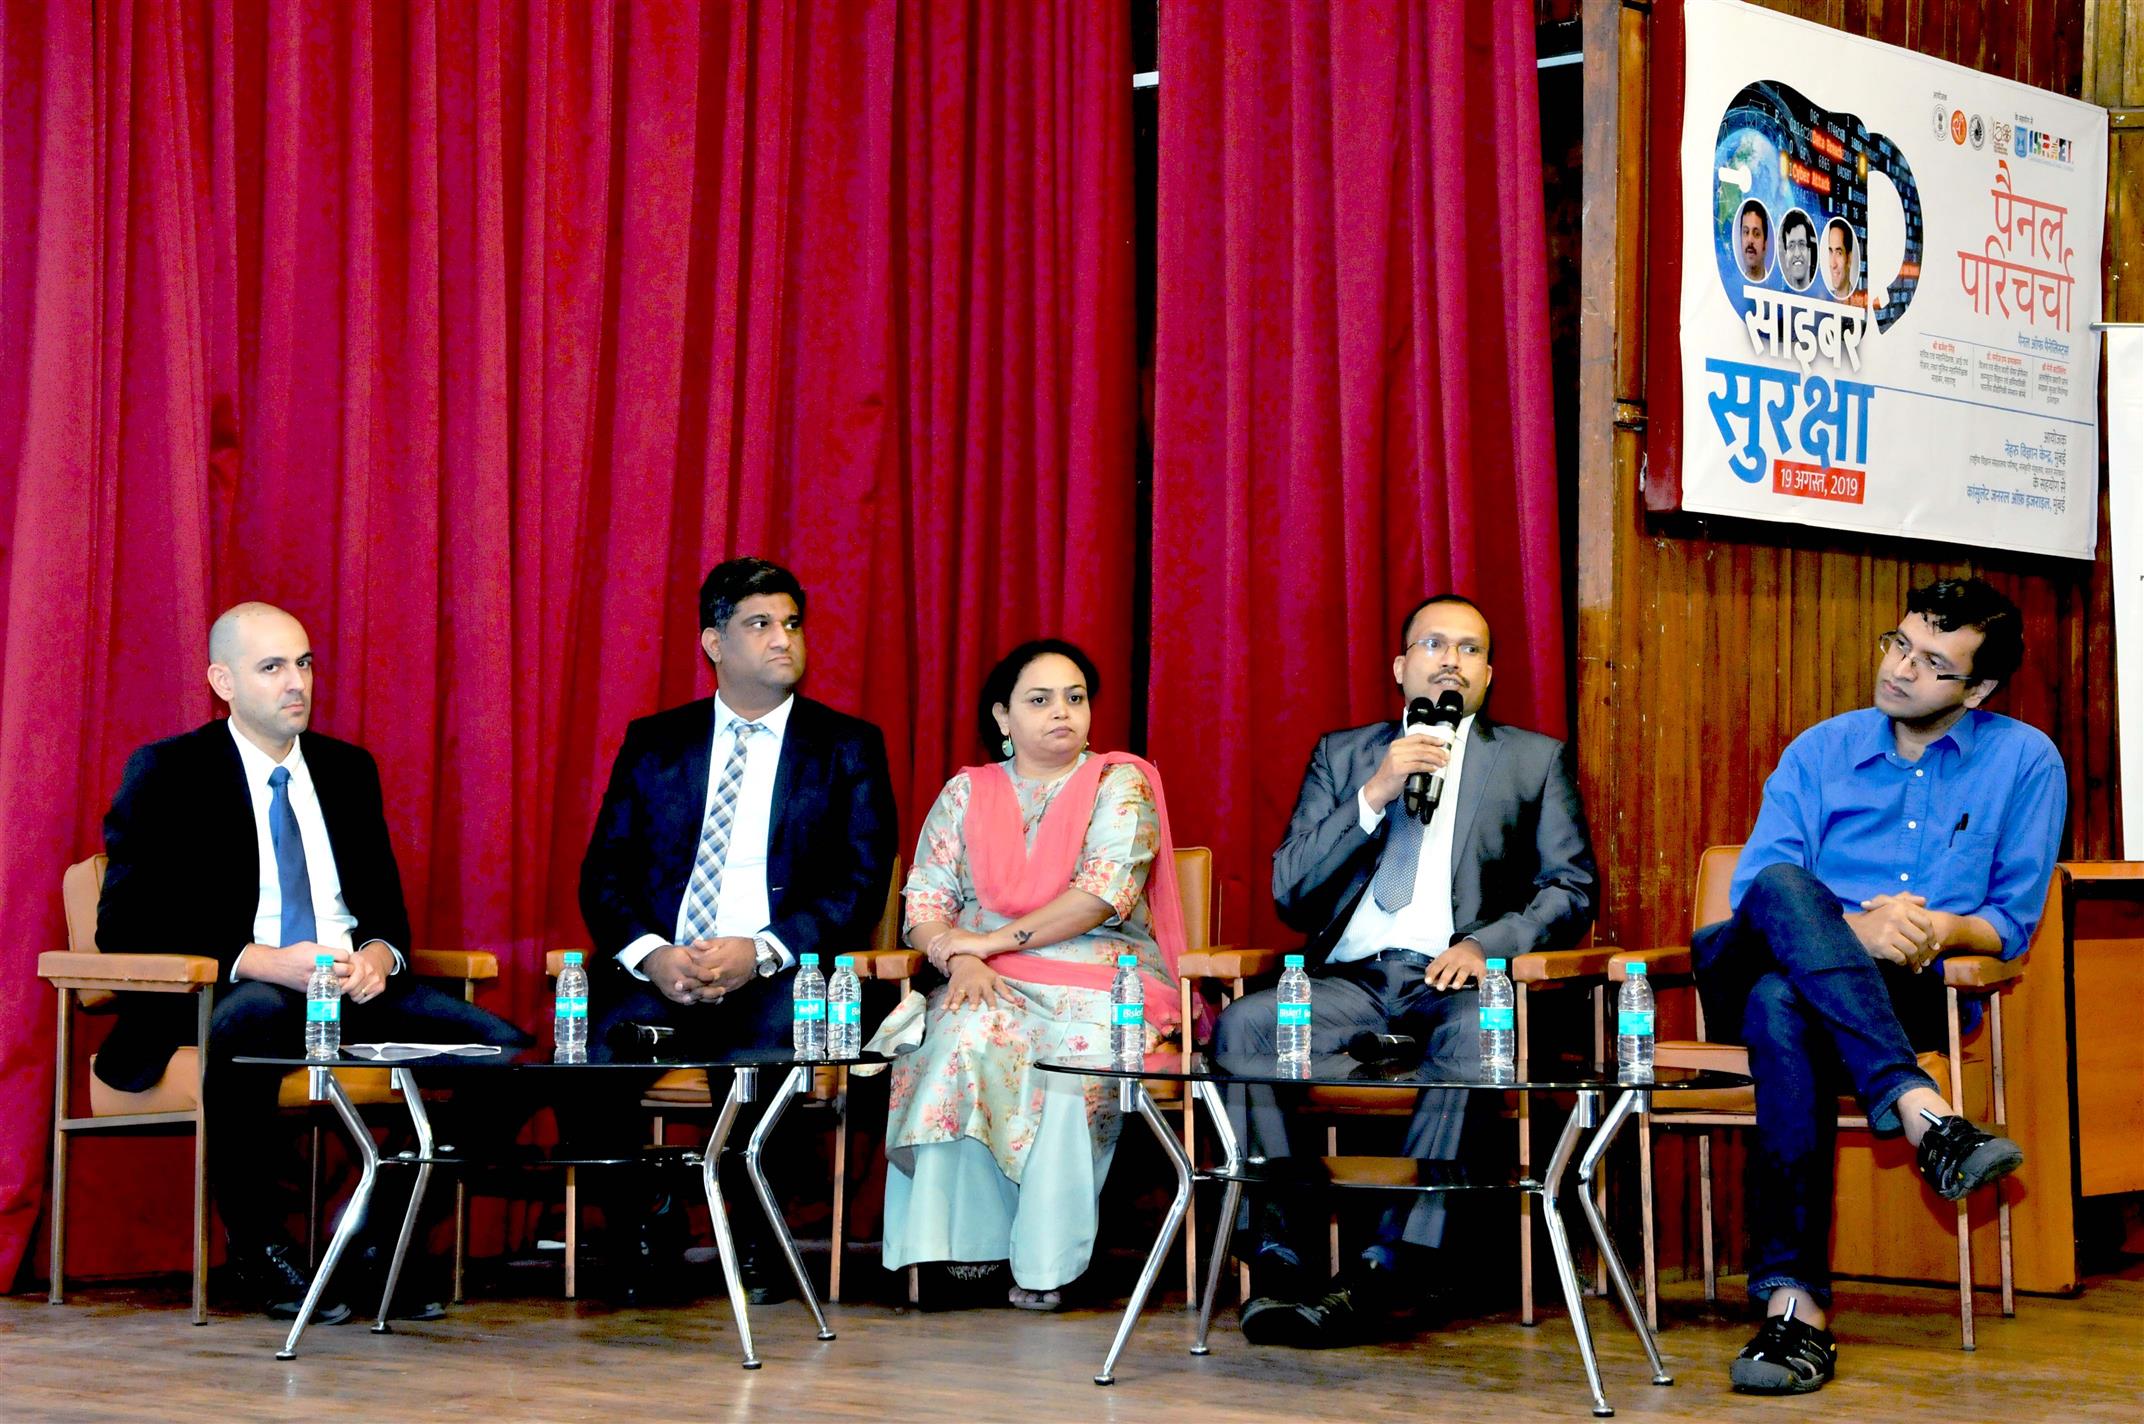 Shri Sachin Bankar, Dy. Commissioner of Police(Cyber Cell), Shri Ritesh Bhatiya, Private Sector, Dr. Manoj M. Prabhakarn, Chair Professor, Computer Science & Engineering, IIT Mumbai  Smt. Sonali Patankar, NGO participate in Panel Discussion on ‘Cyber Security’ organized by The Consulate General of Israel, Mumbai and Nehru Science Centre, Worli, Mumbai on August 19, 2019.